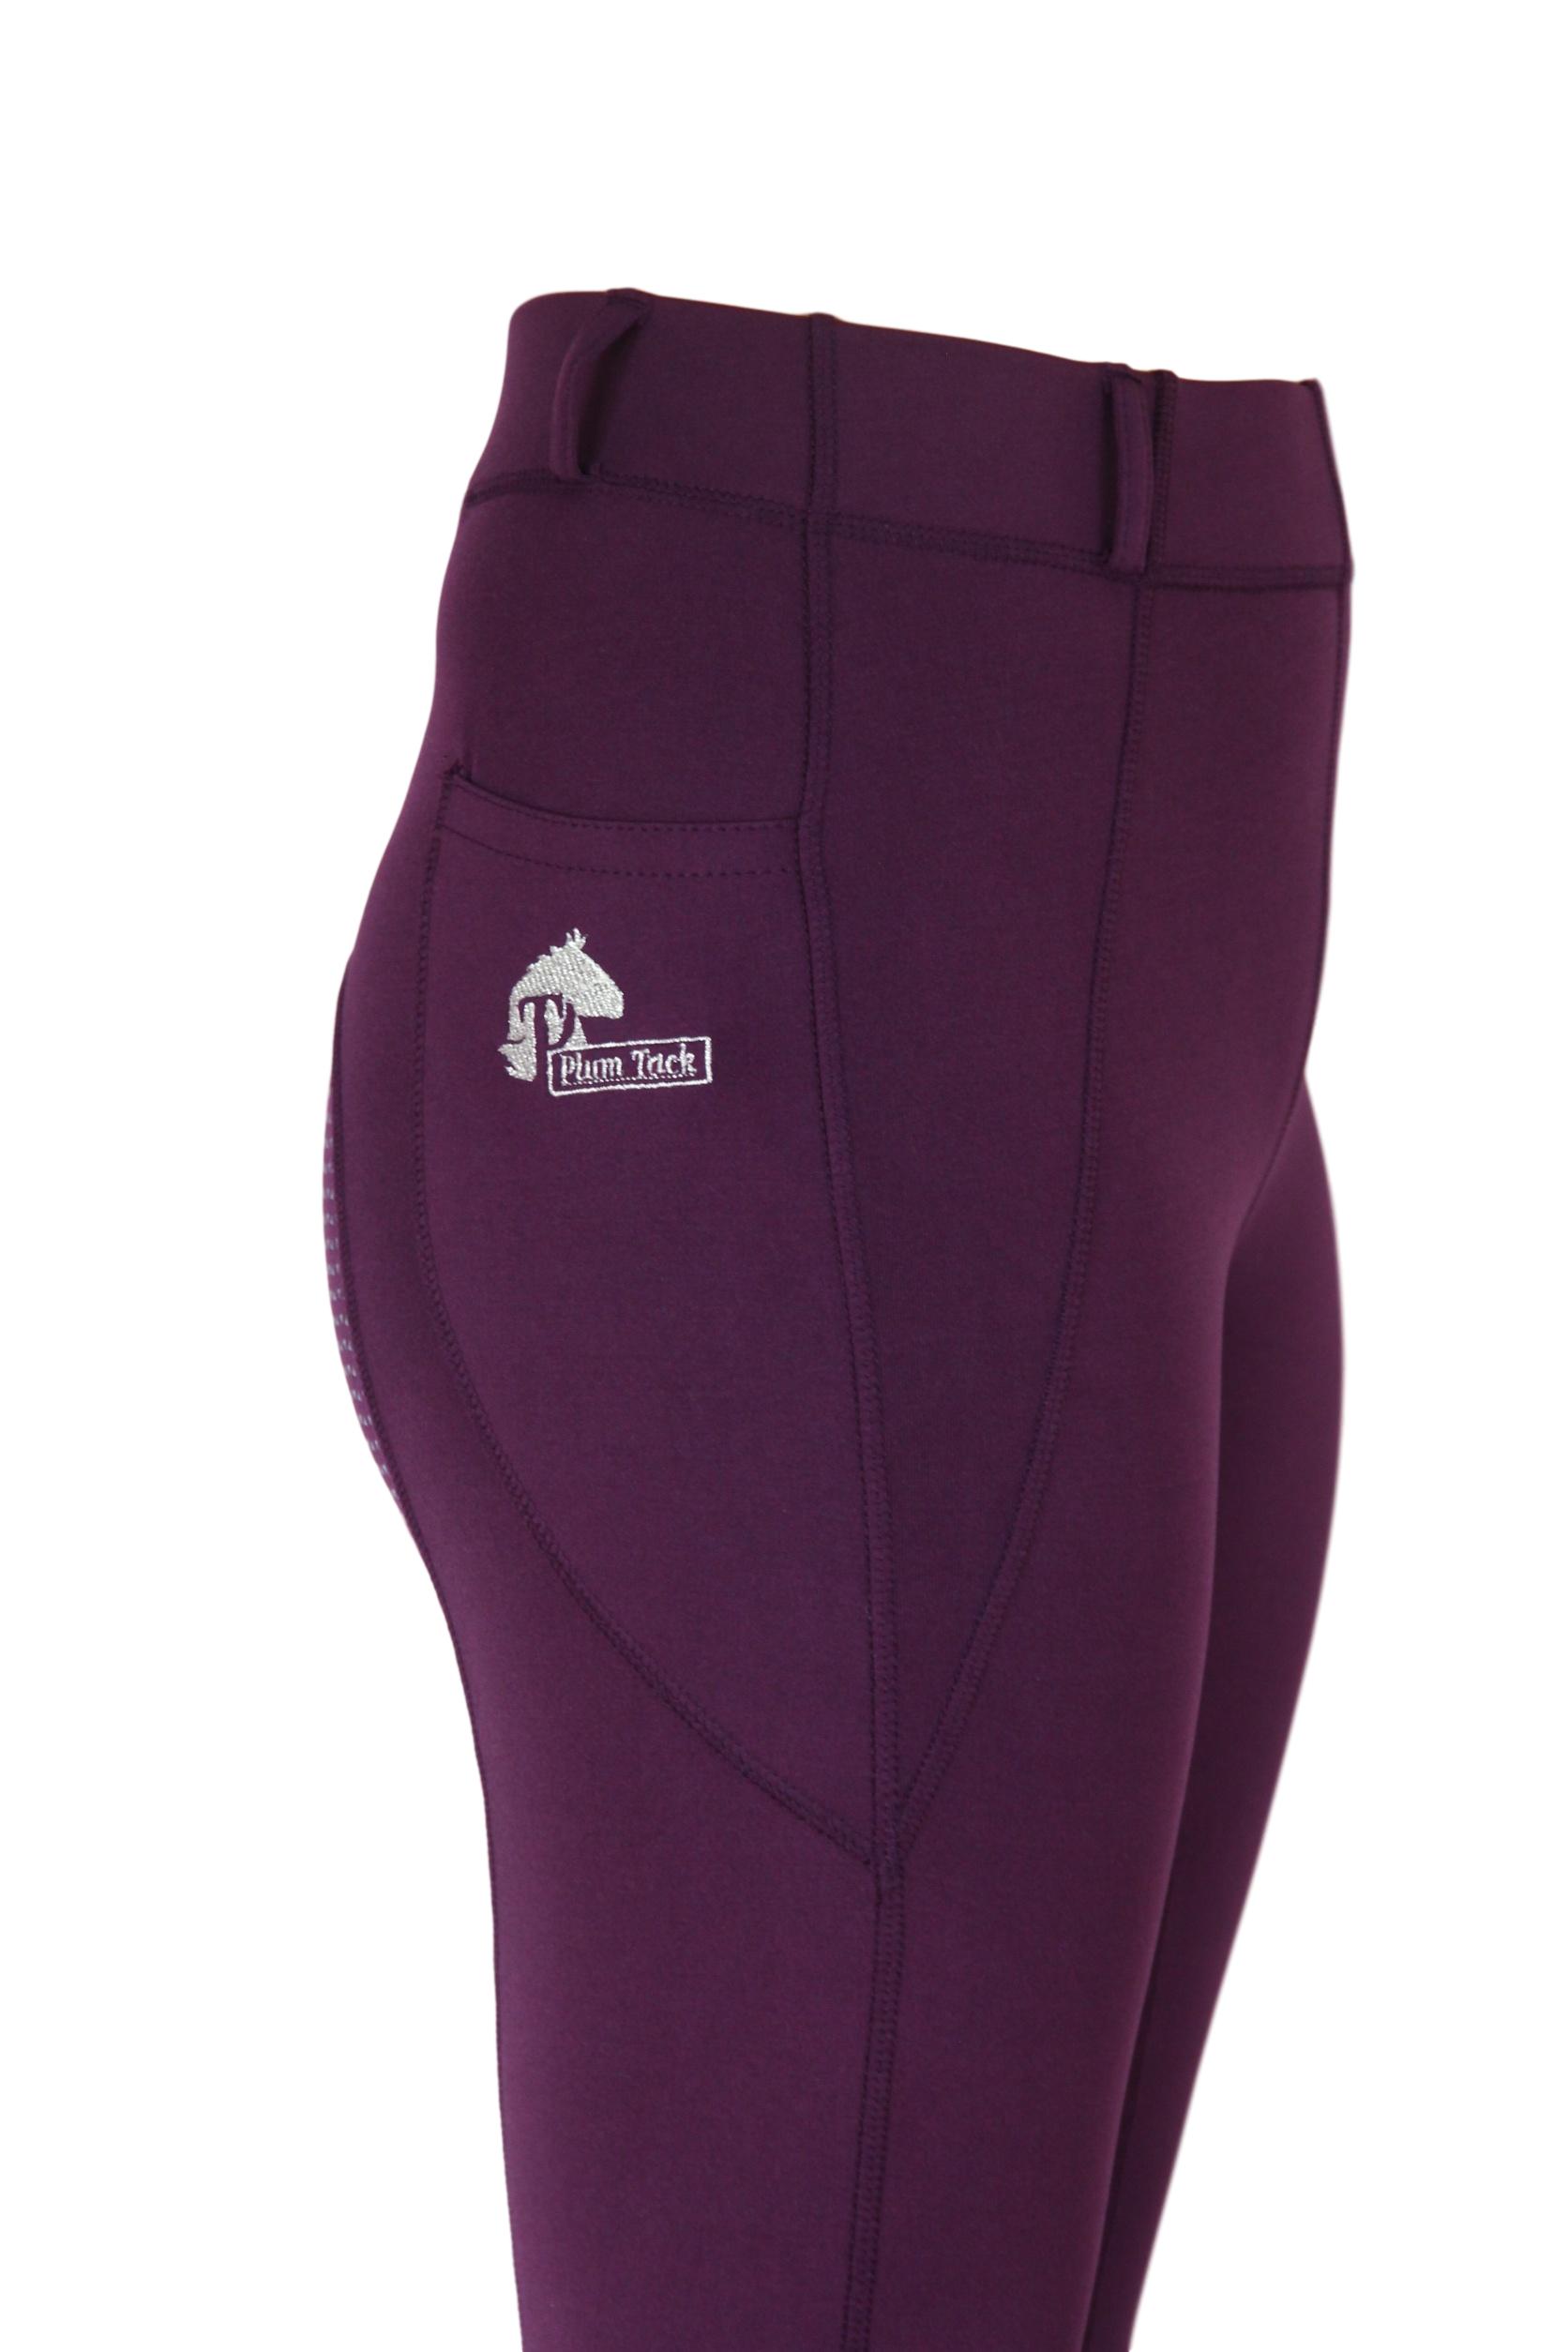 Riding tights in Wine with or without silicone grip - Plum Tack